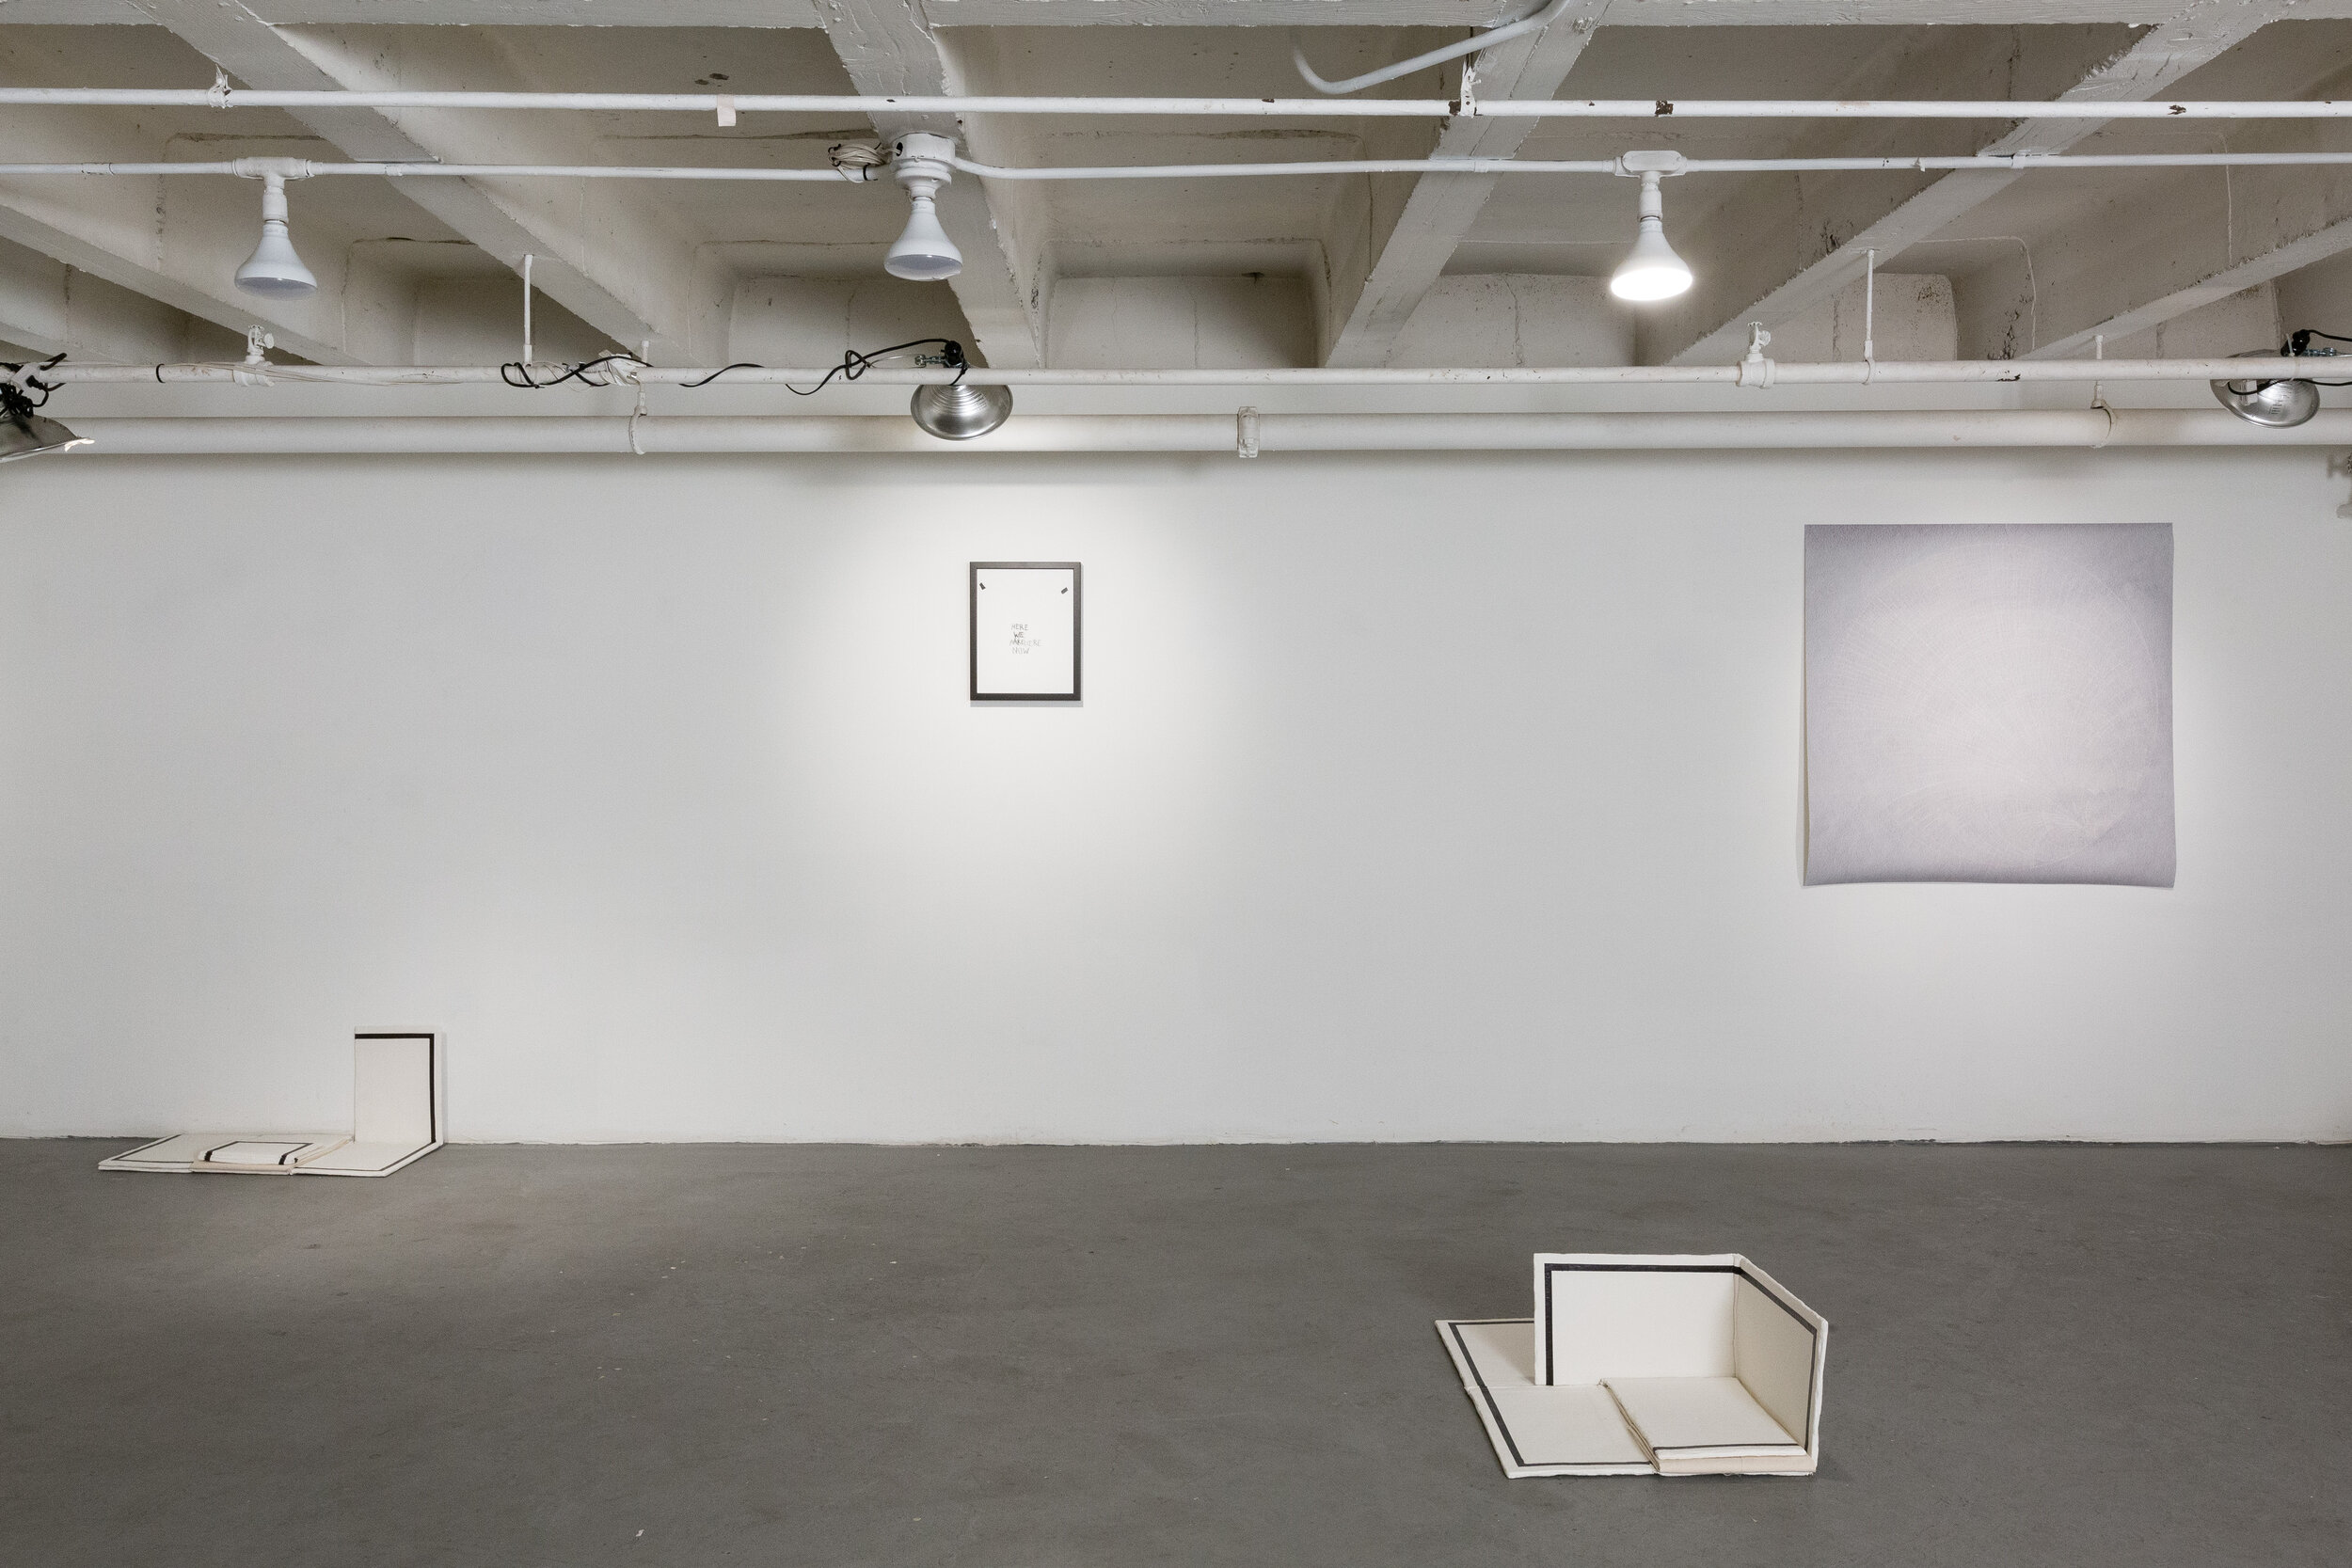   One After Another, In Succession , Curated by Johanna Breiding, Installation at CJG Oct 2015 